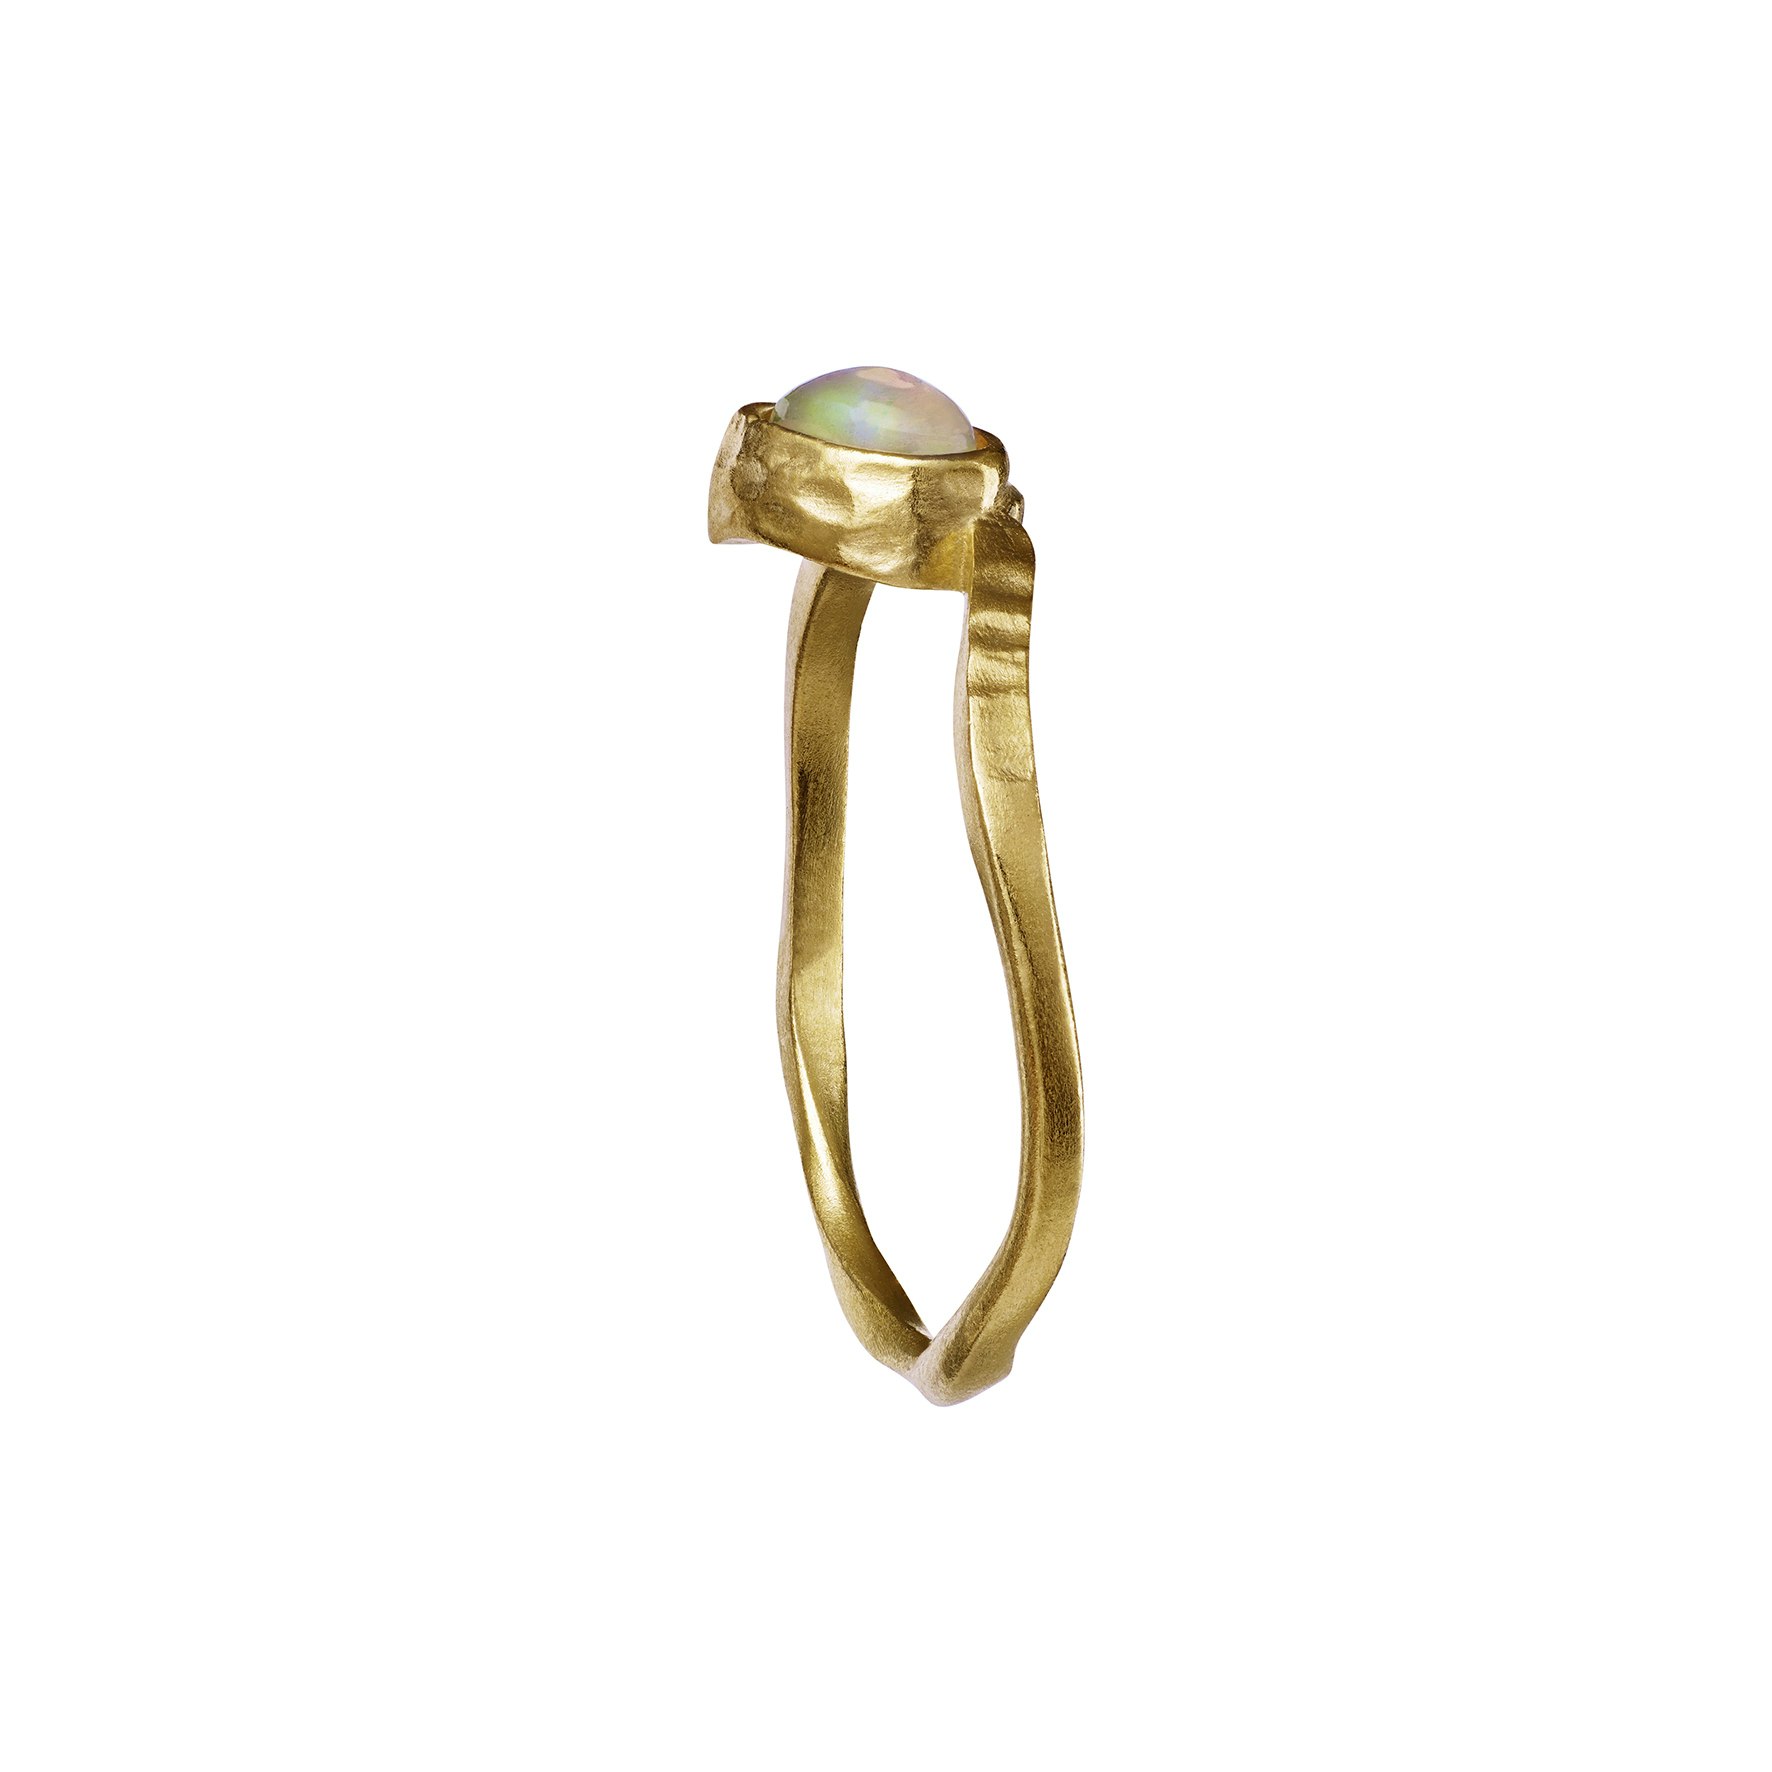 Cille Ring from Maanesten in Goldplated-Silver Sterling 925